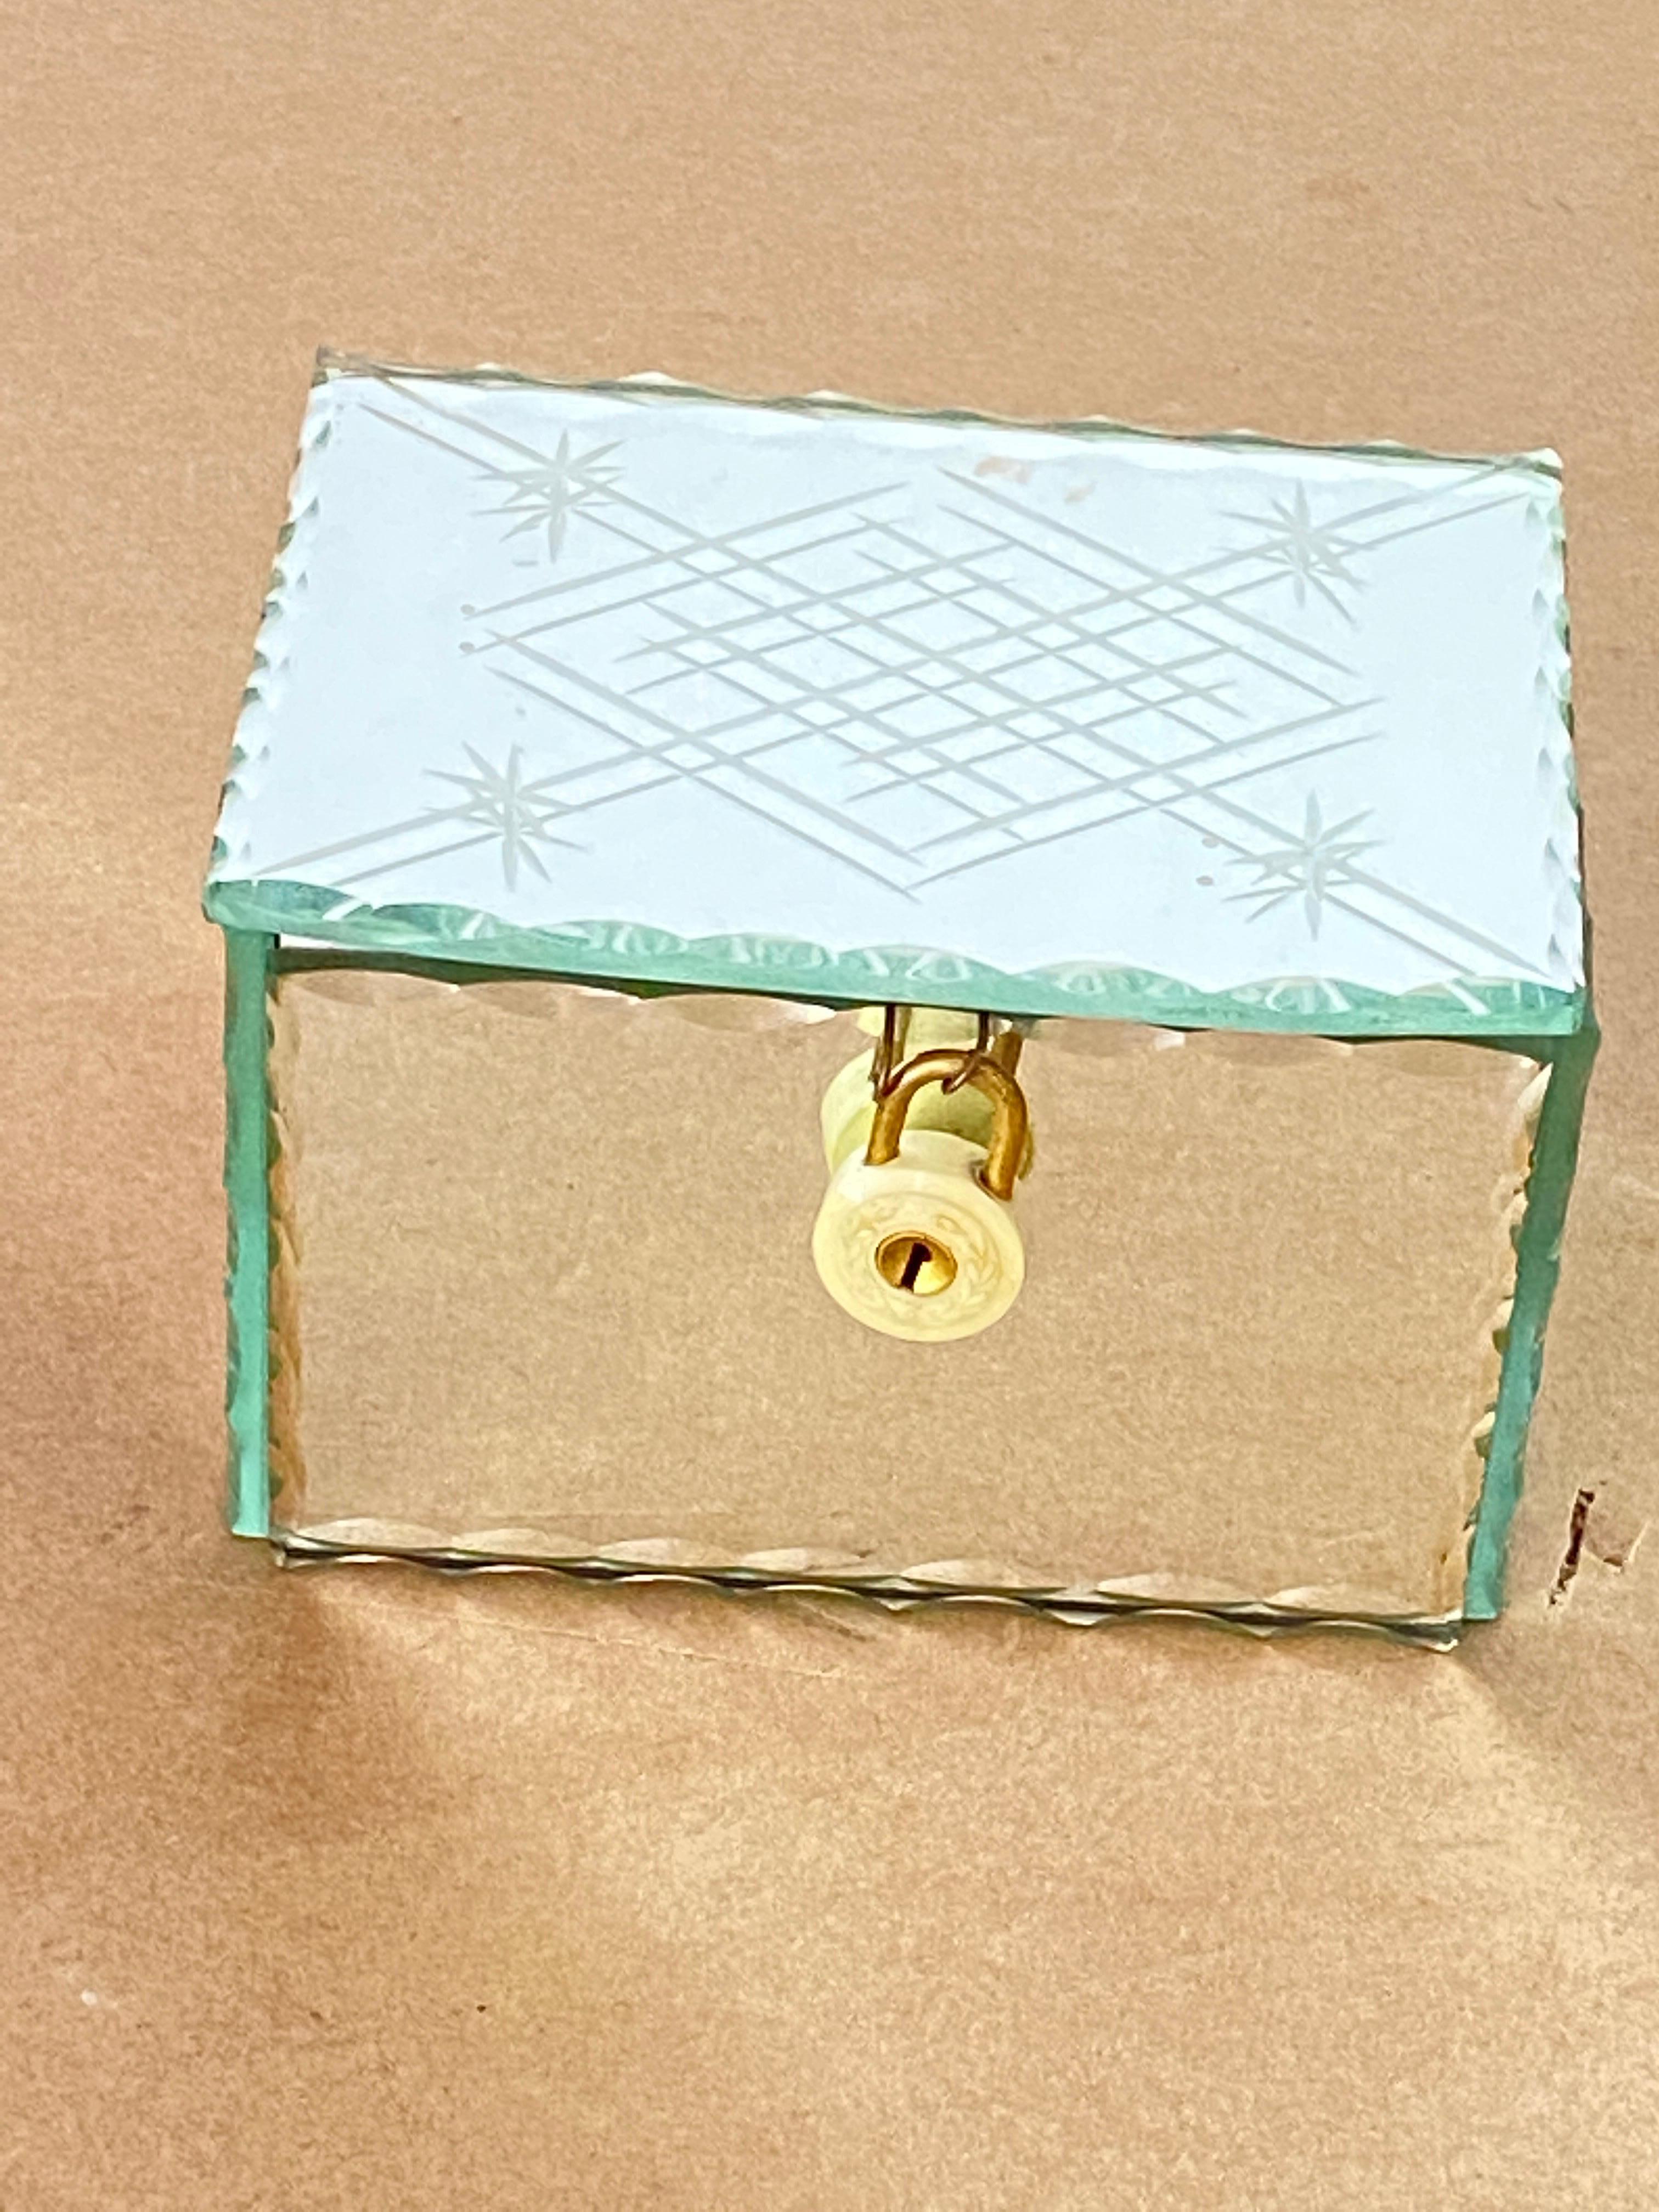 It is a rectangular beveled glass box.
It is closed by a padlock, which is rather decorative.
This box was made in France during the 1940s. It is a jewelry box, which is also a decorative box.